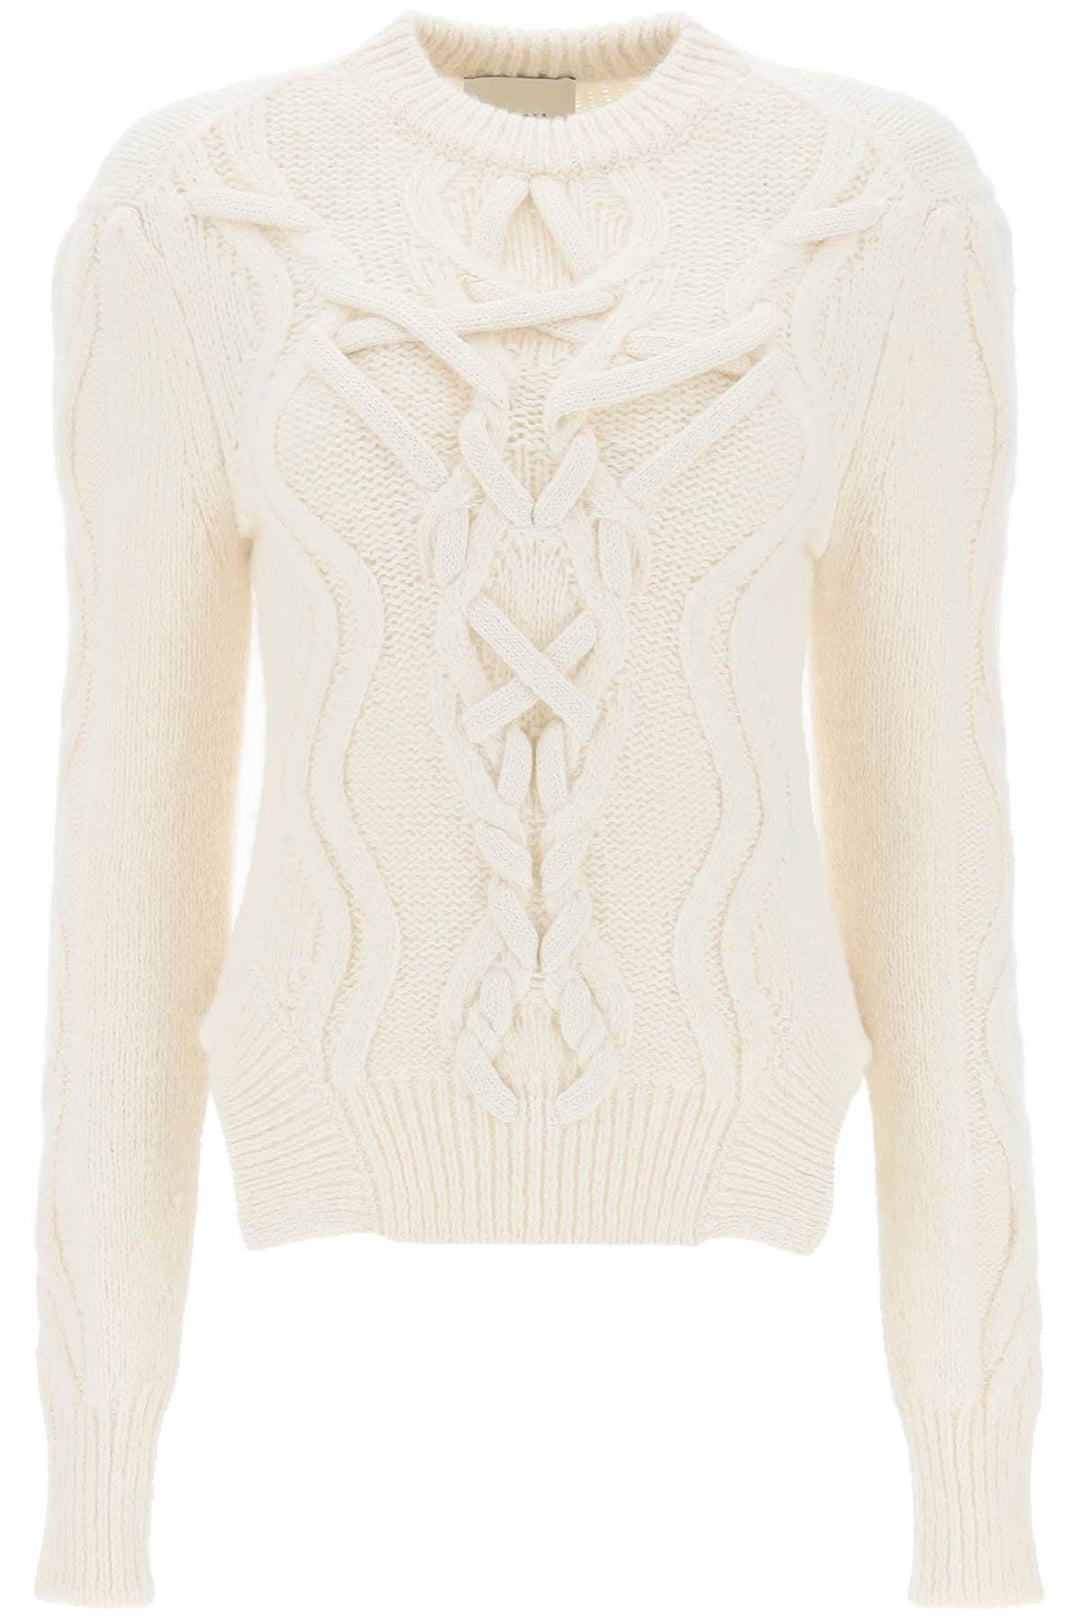 Isabel Marant Elvy Cable Knit Sweater   Bianco